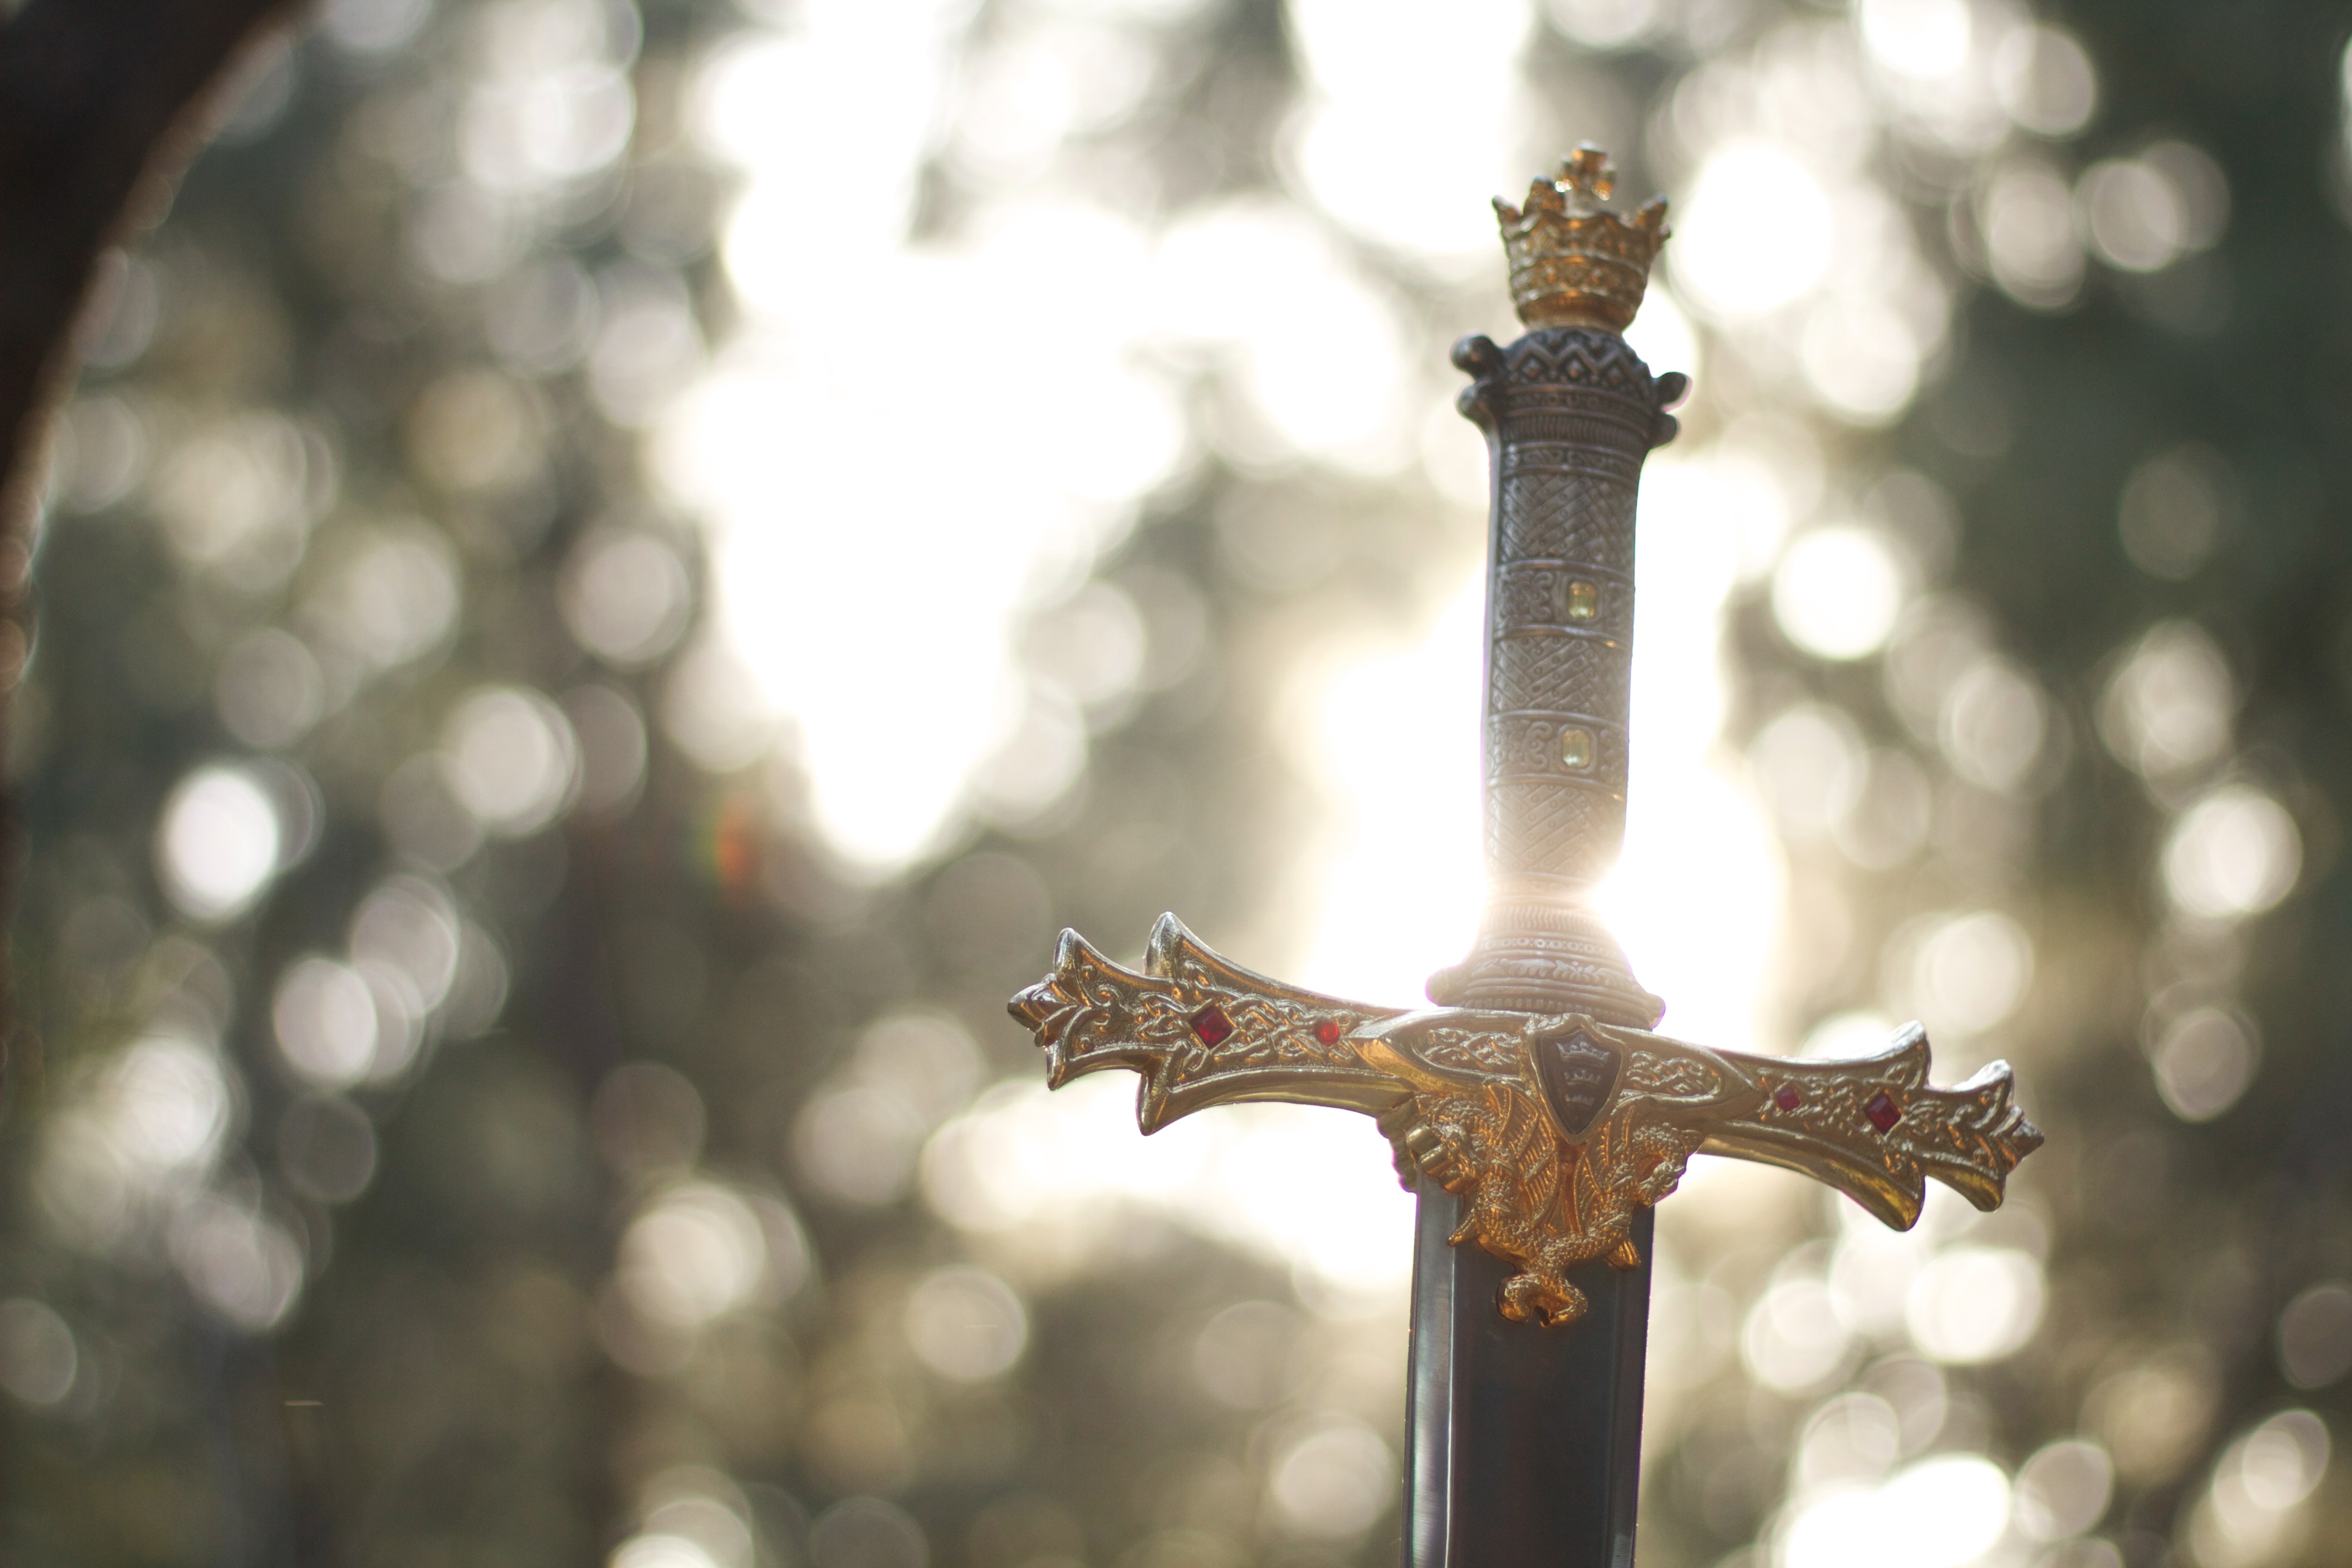 A photo of the hilt of a jeweled sword with a brightly lit forest background